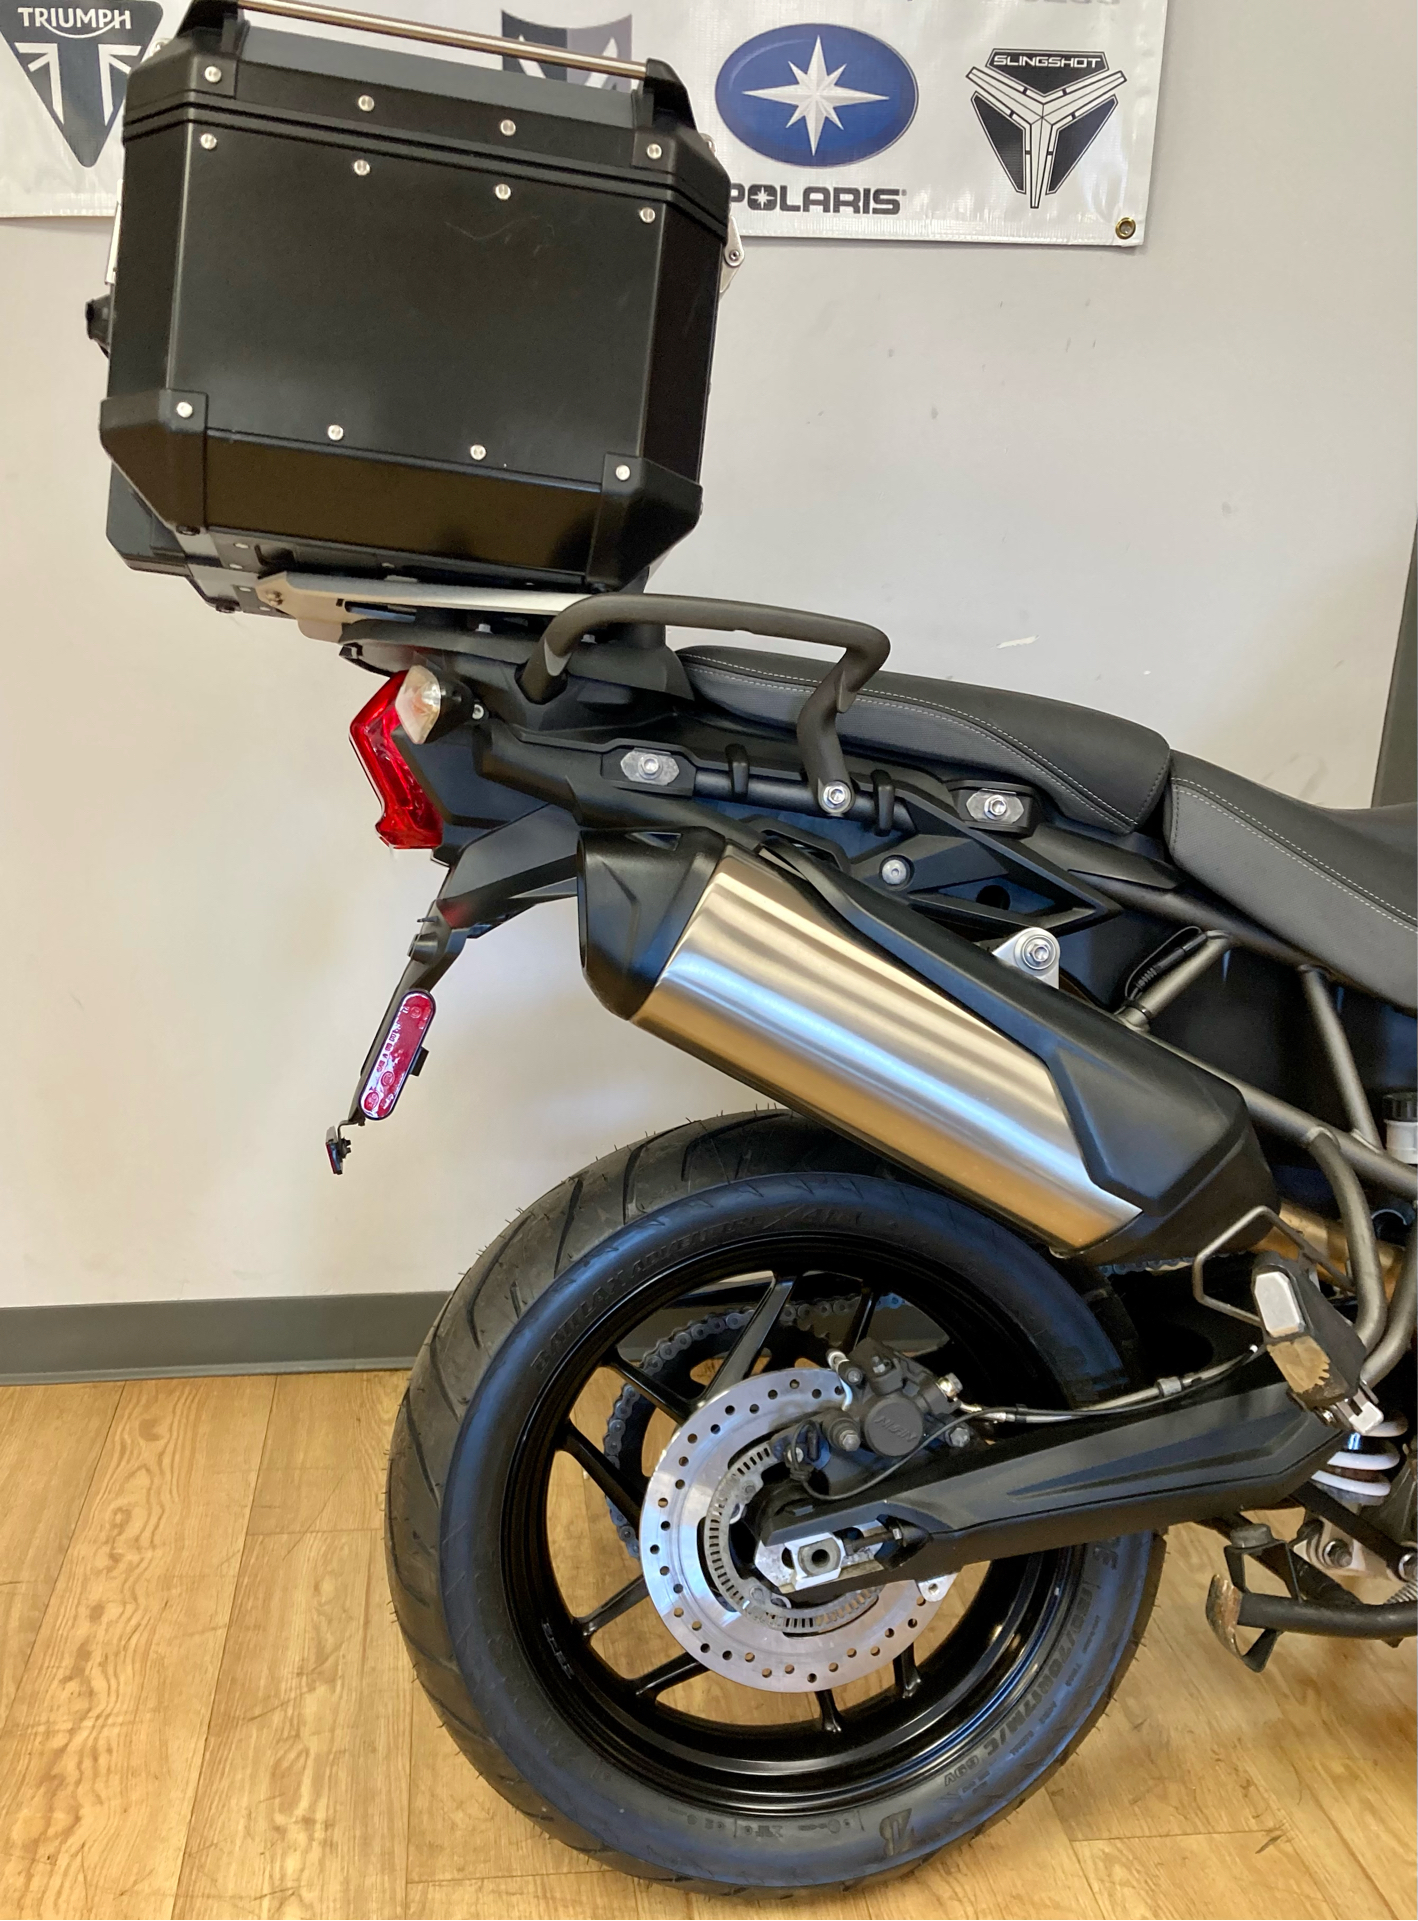 2018 Triumph Tiger 800 XRt in Mahwah, New Jersey - Photo 6